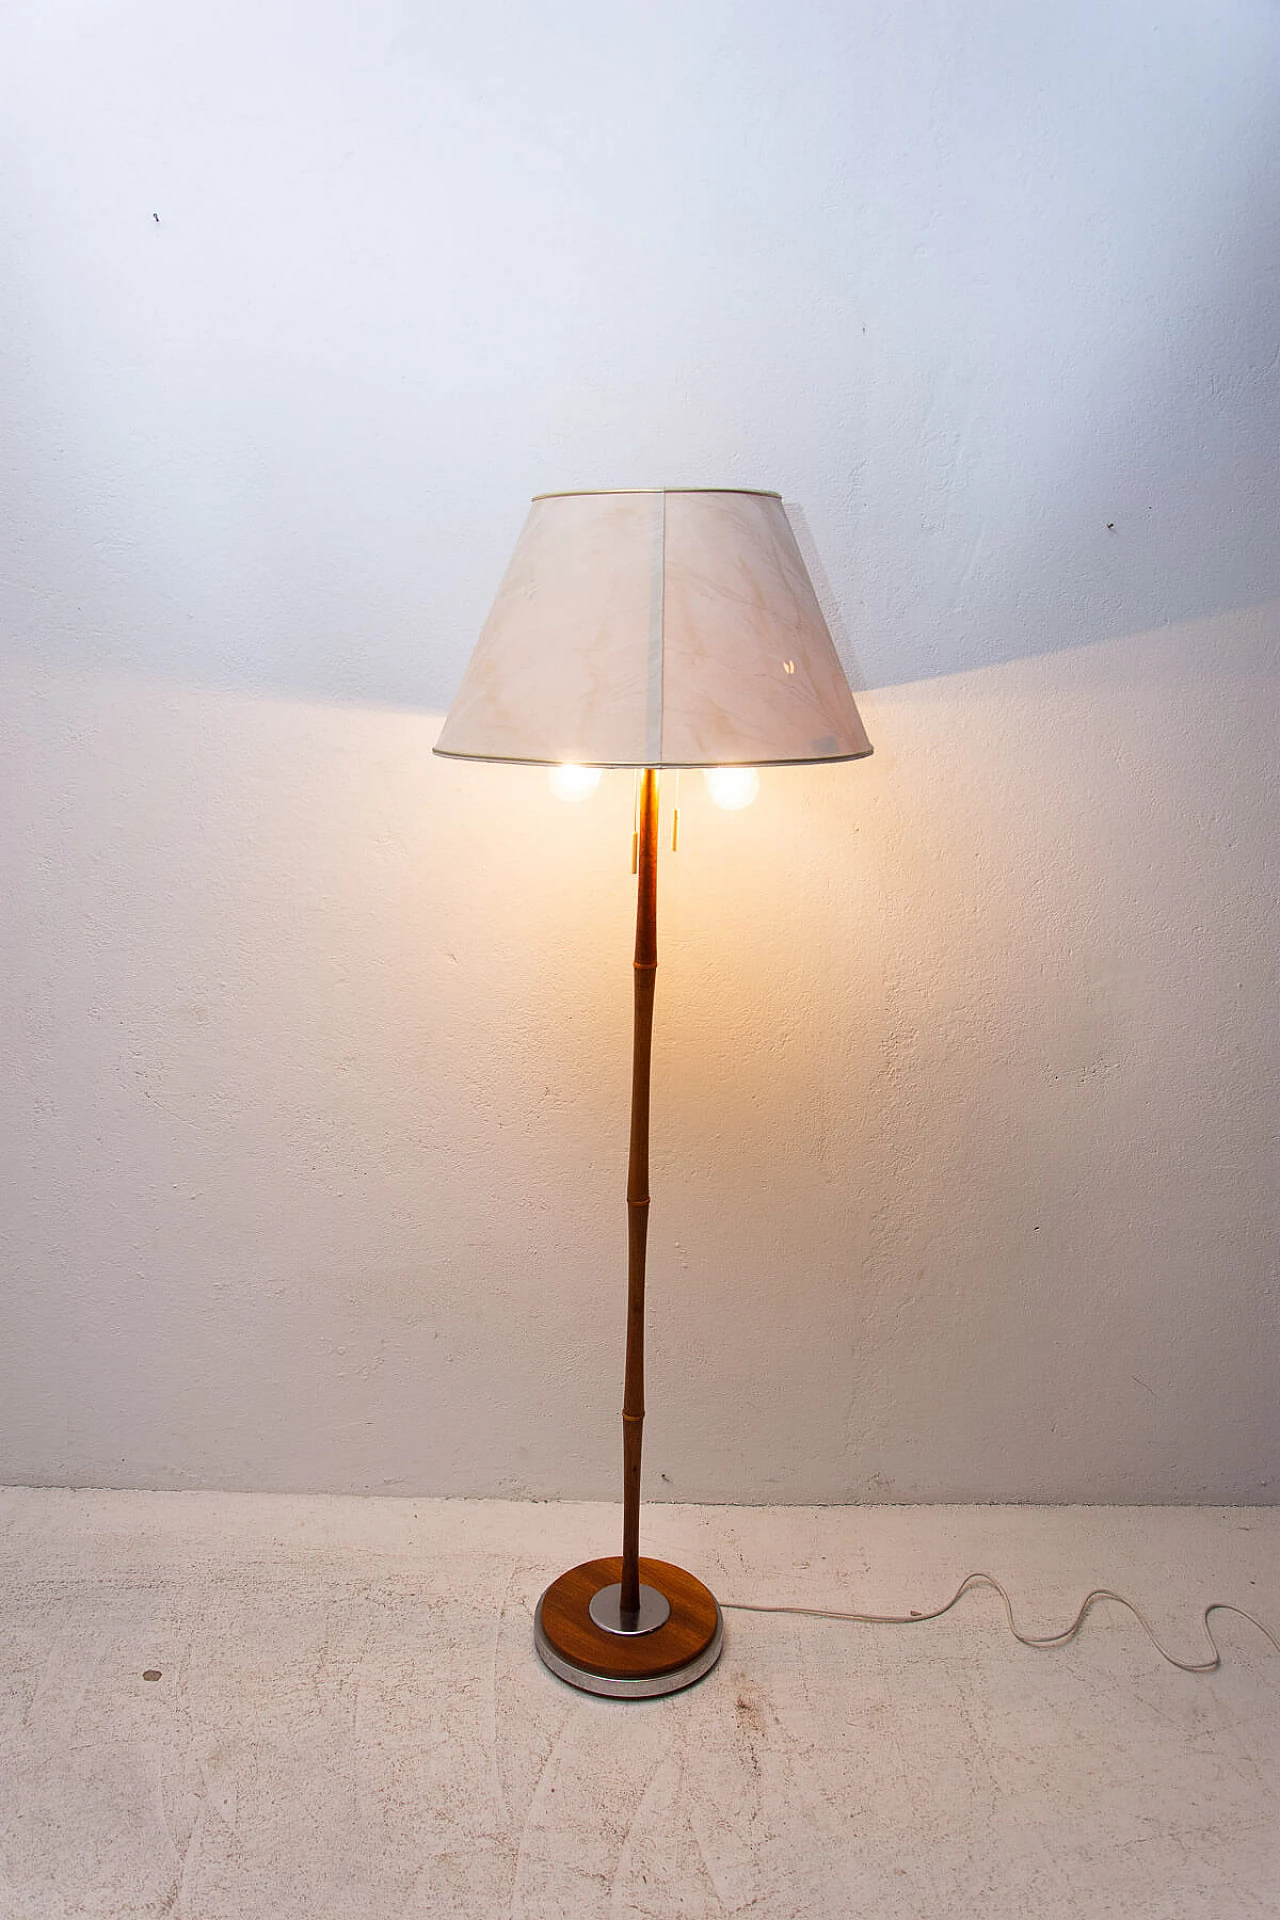 Floor lamp with wooden frame, 1960s 1364096